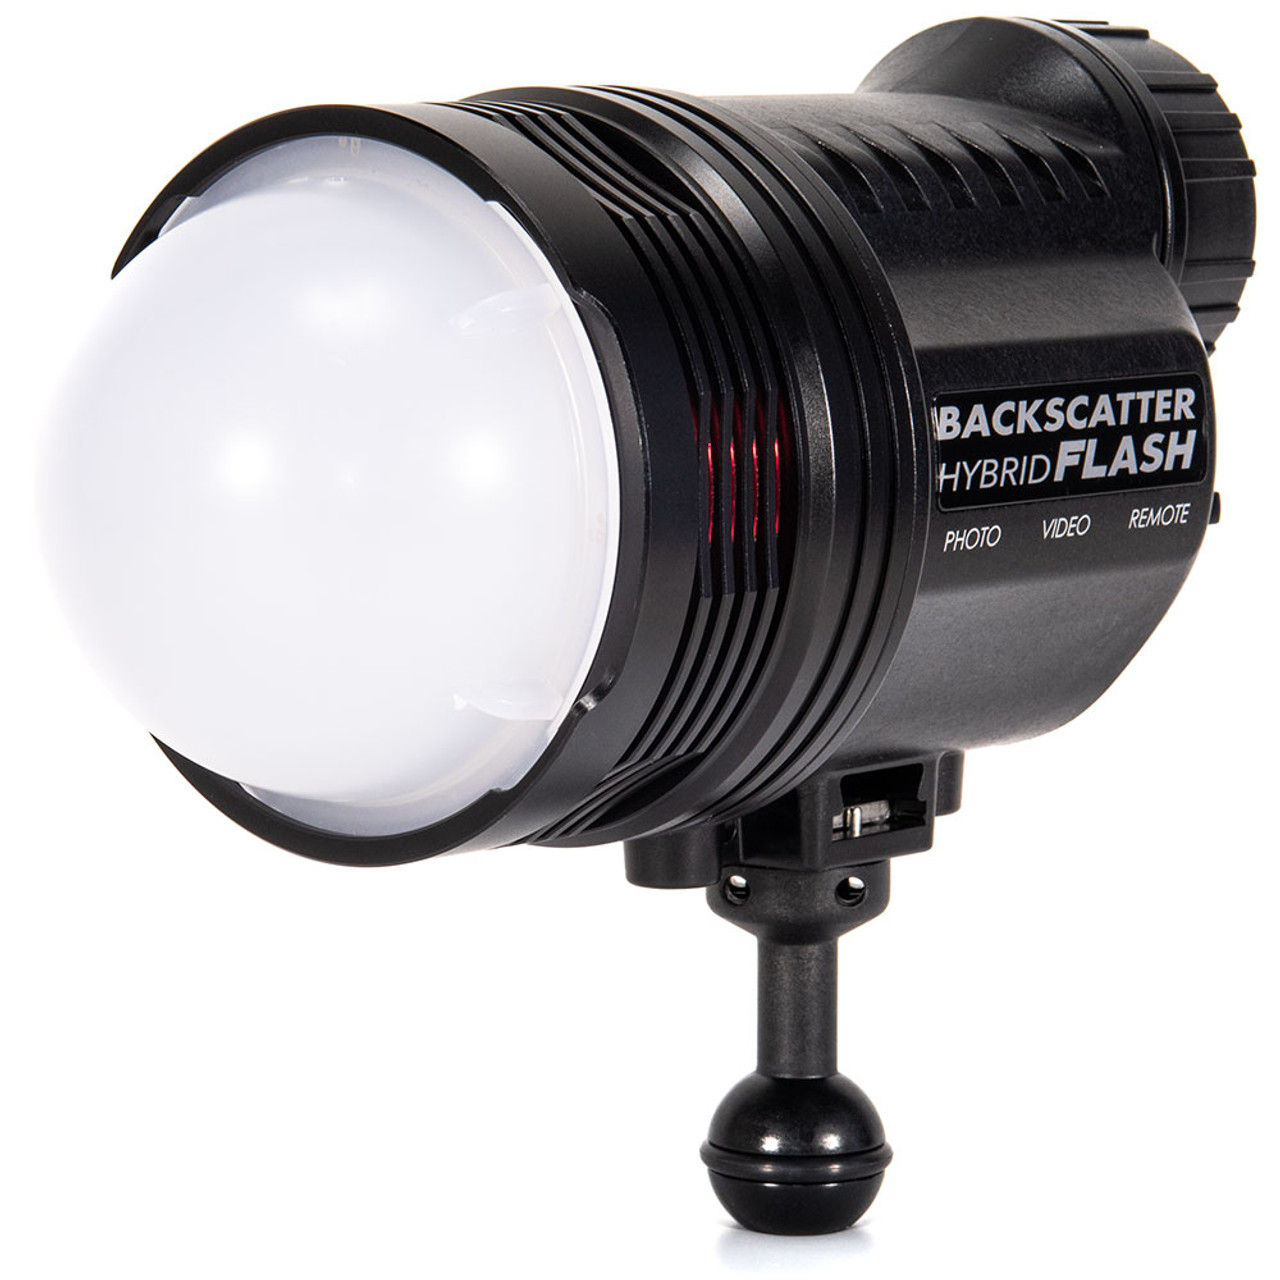 The Backscatter White Dome Diffuser as fitted to the Backscatter Hybrid Flash